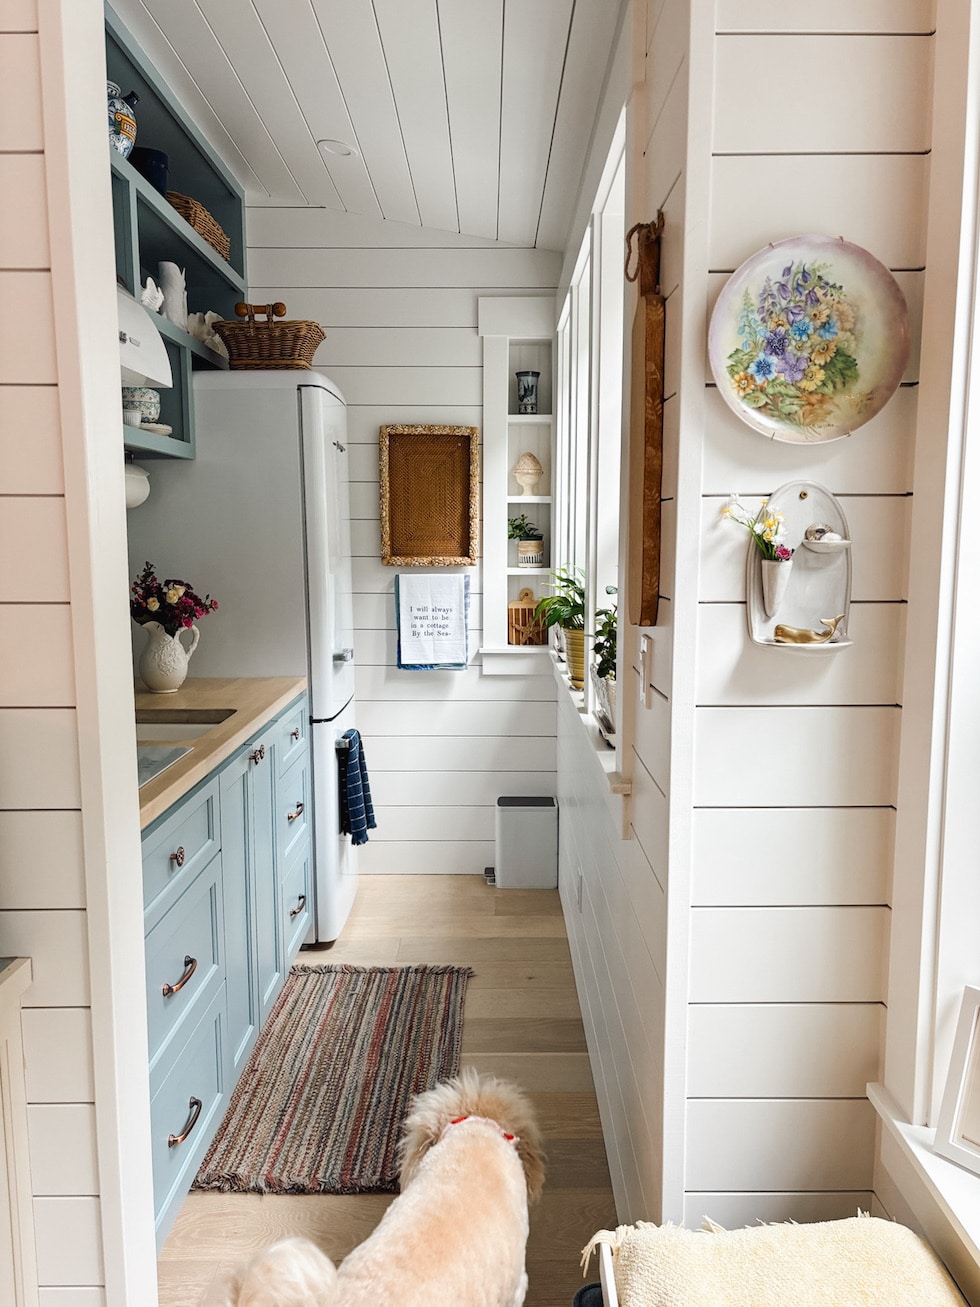 Spring in the Tiny Cottage: A Reflection on Having Less in a Cottage by the Sea